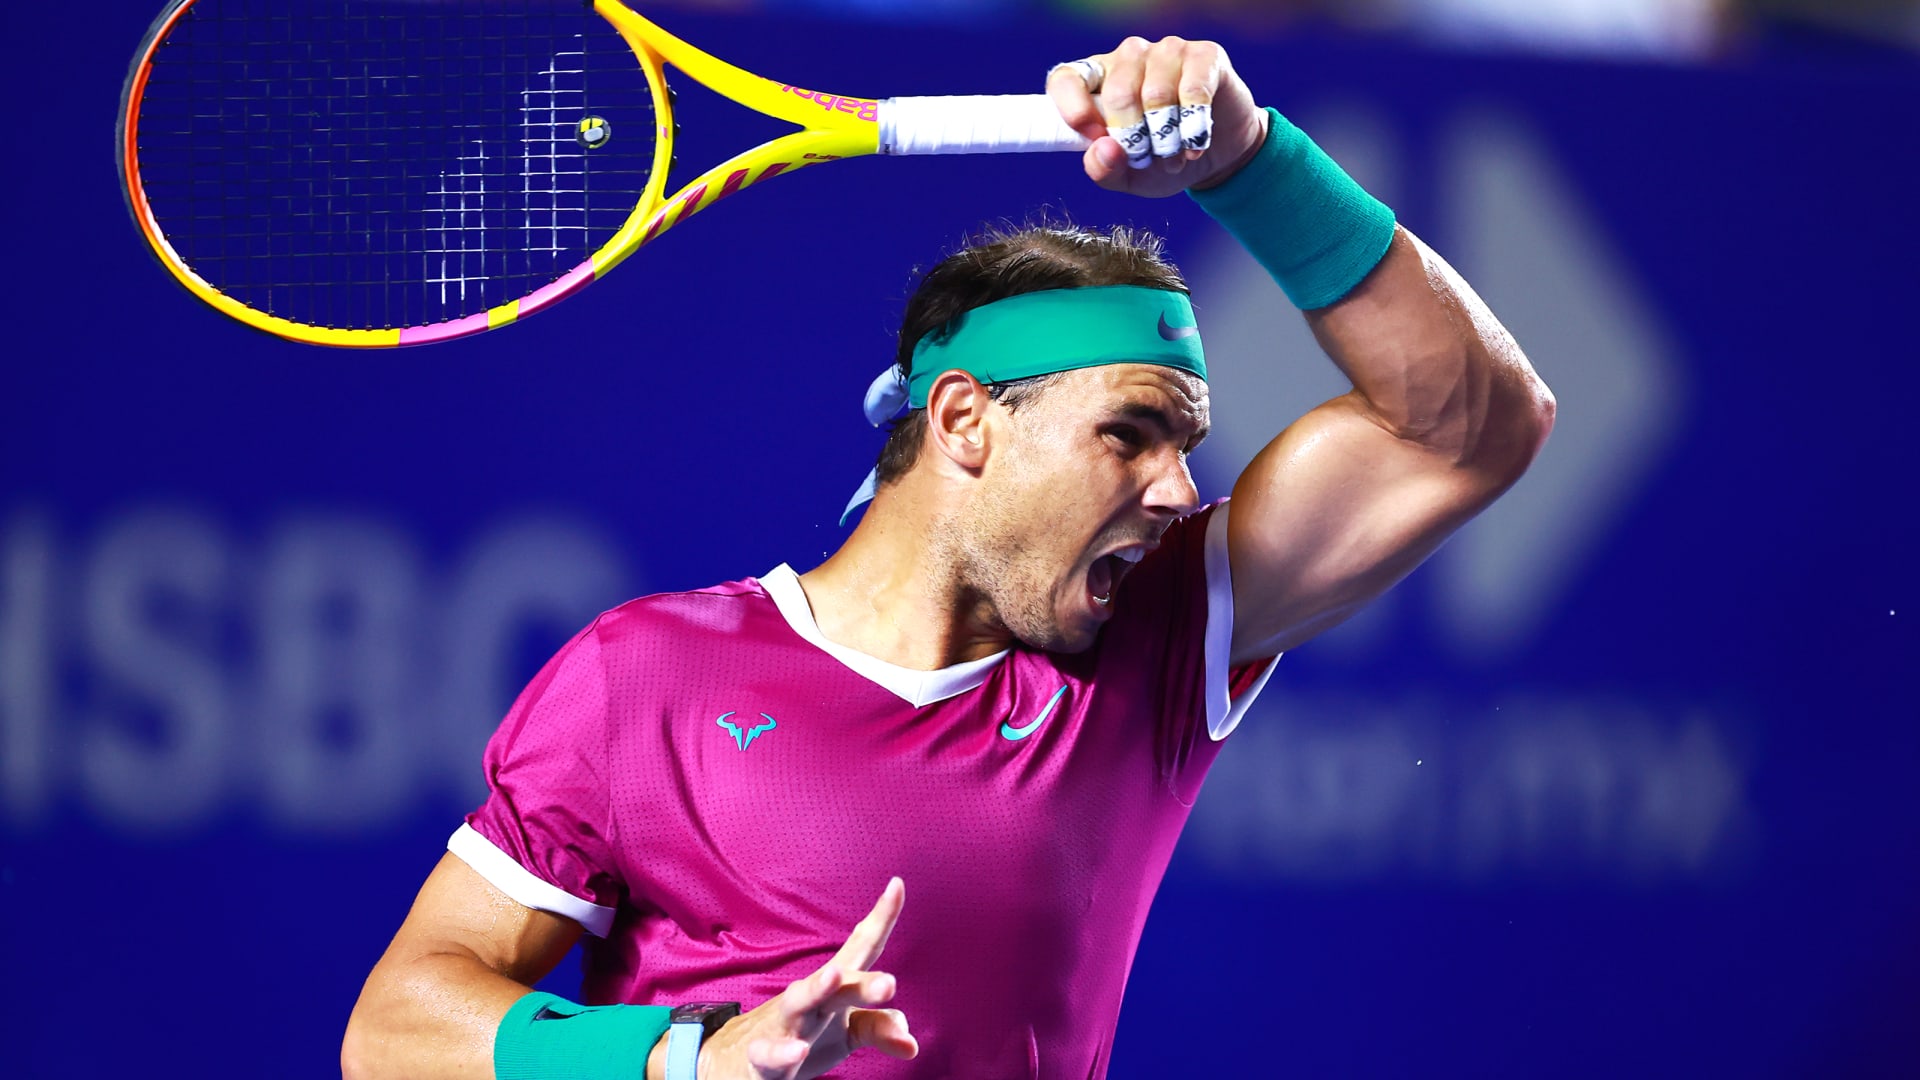 BNP Paribas Open: Rafael Nadal grinds out 18th straight win to start 2022